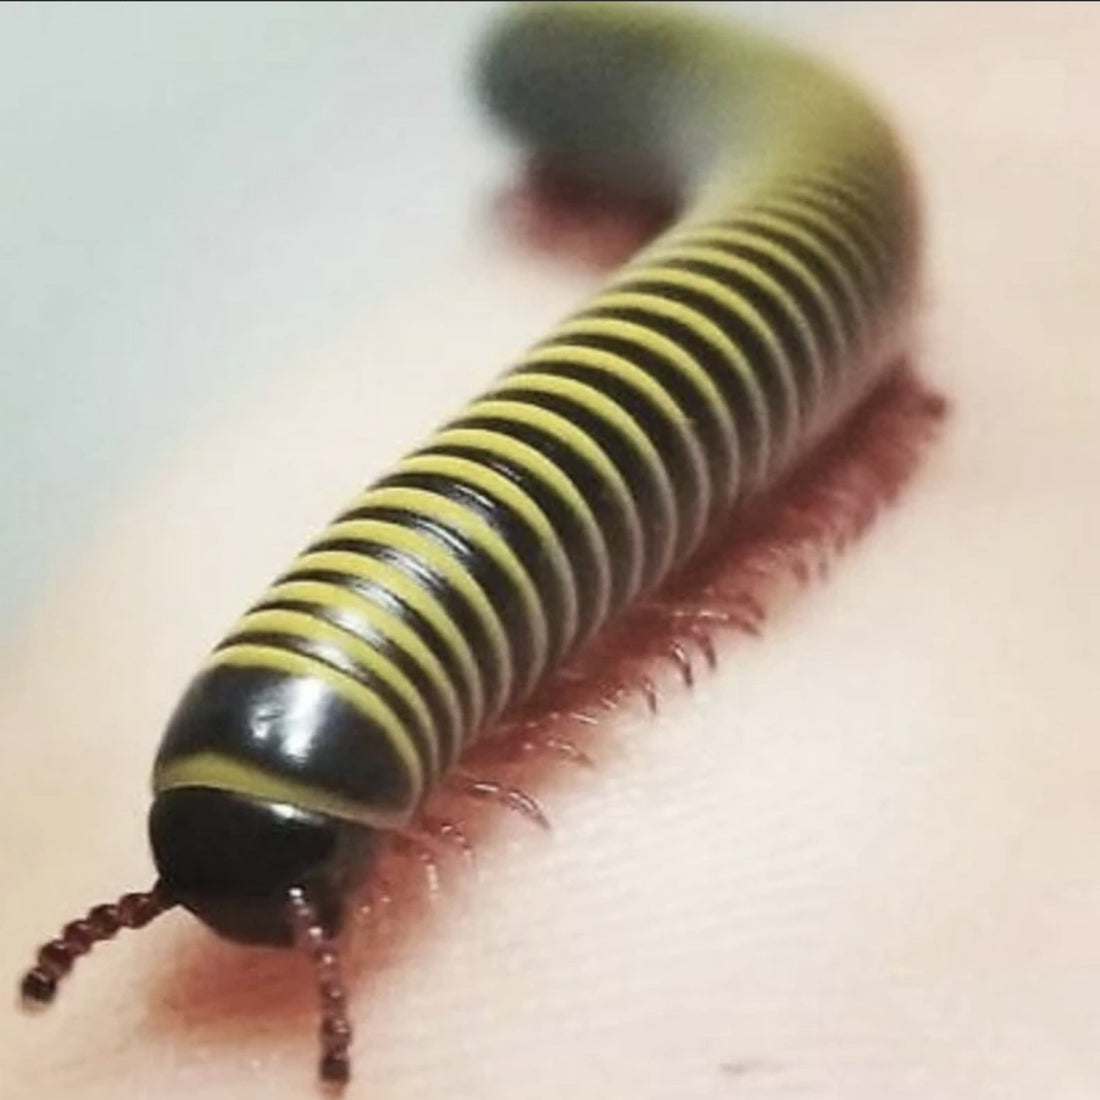 Bumblebee Millipede Facts & Care - Wild Pet Supply